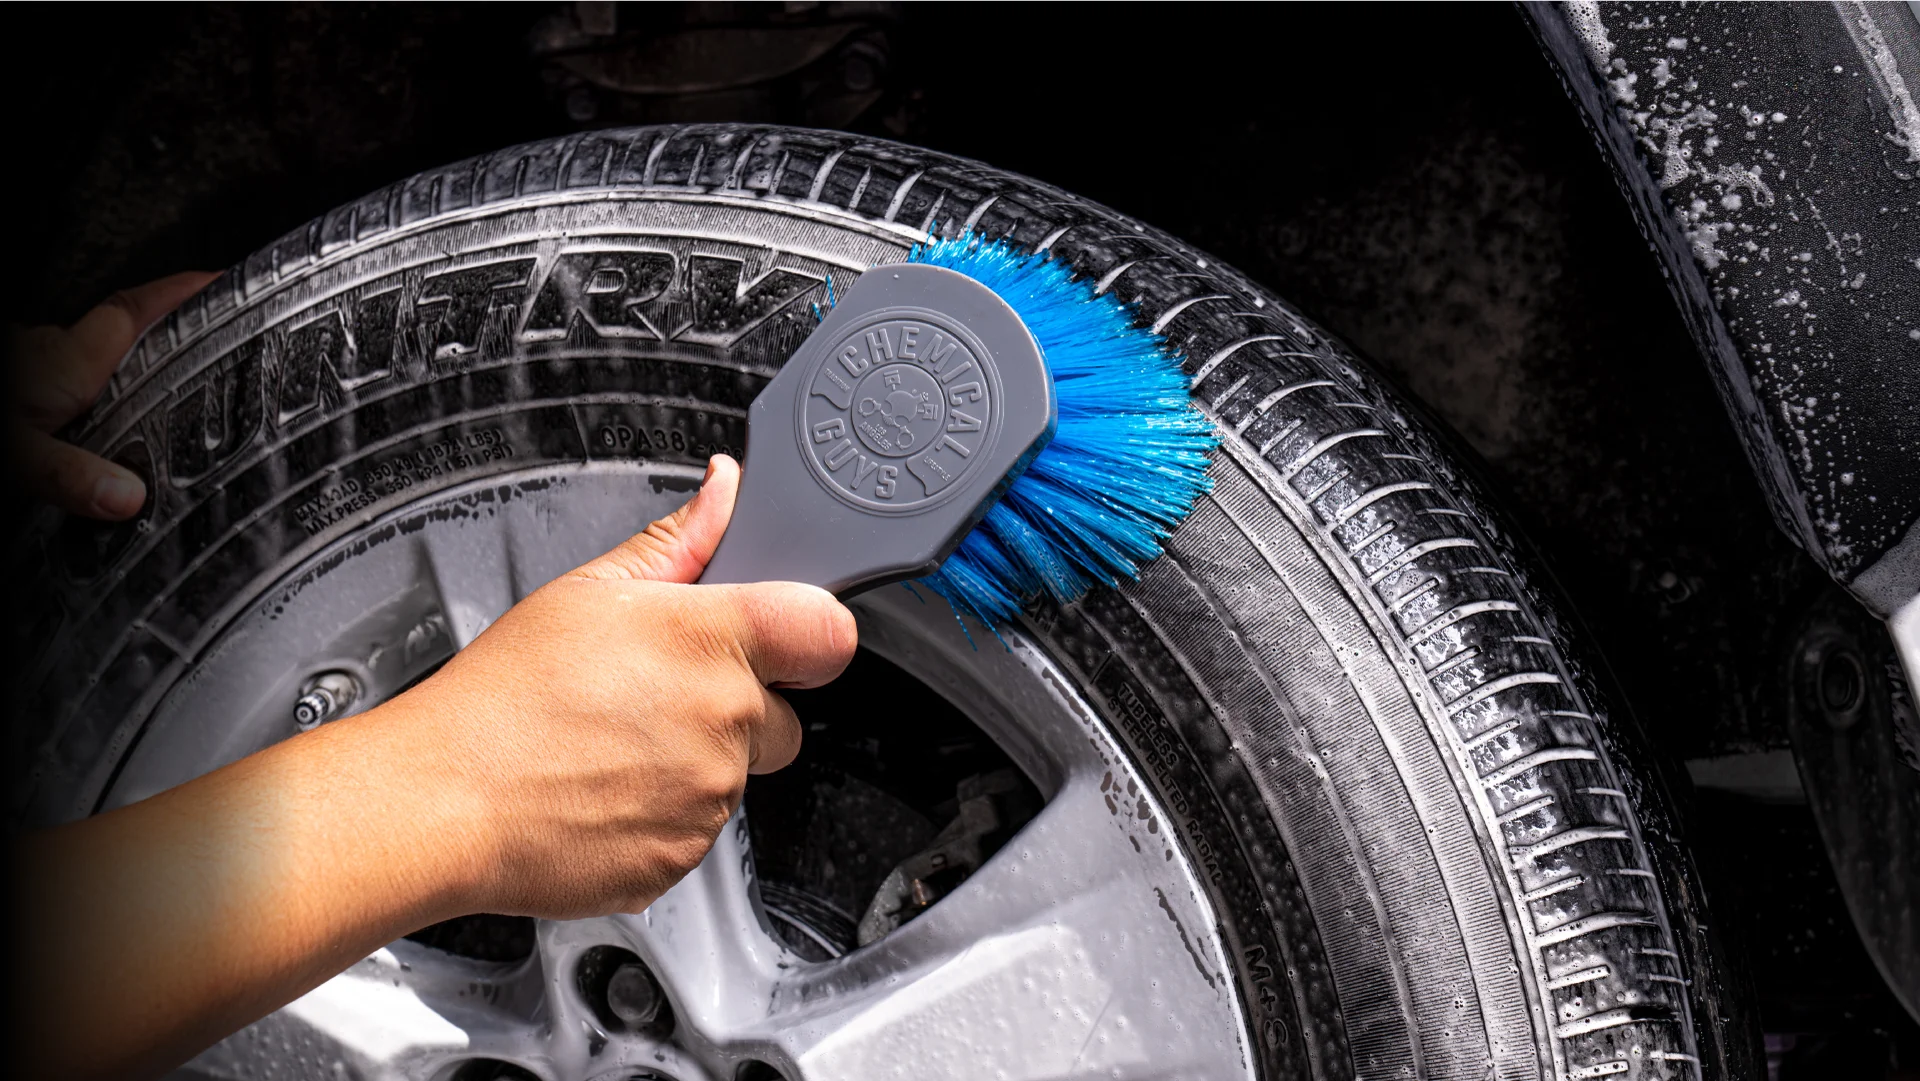 Chemical Guys All Exterior Surface and Wheel Brush, Wheelie